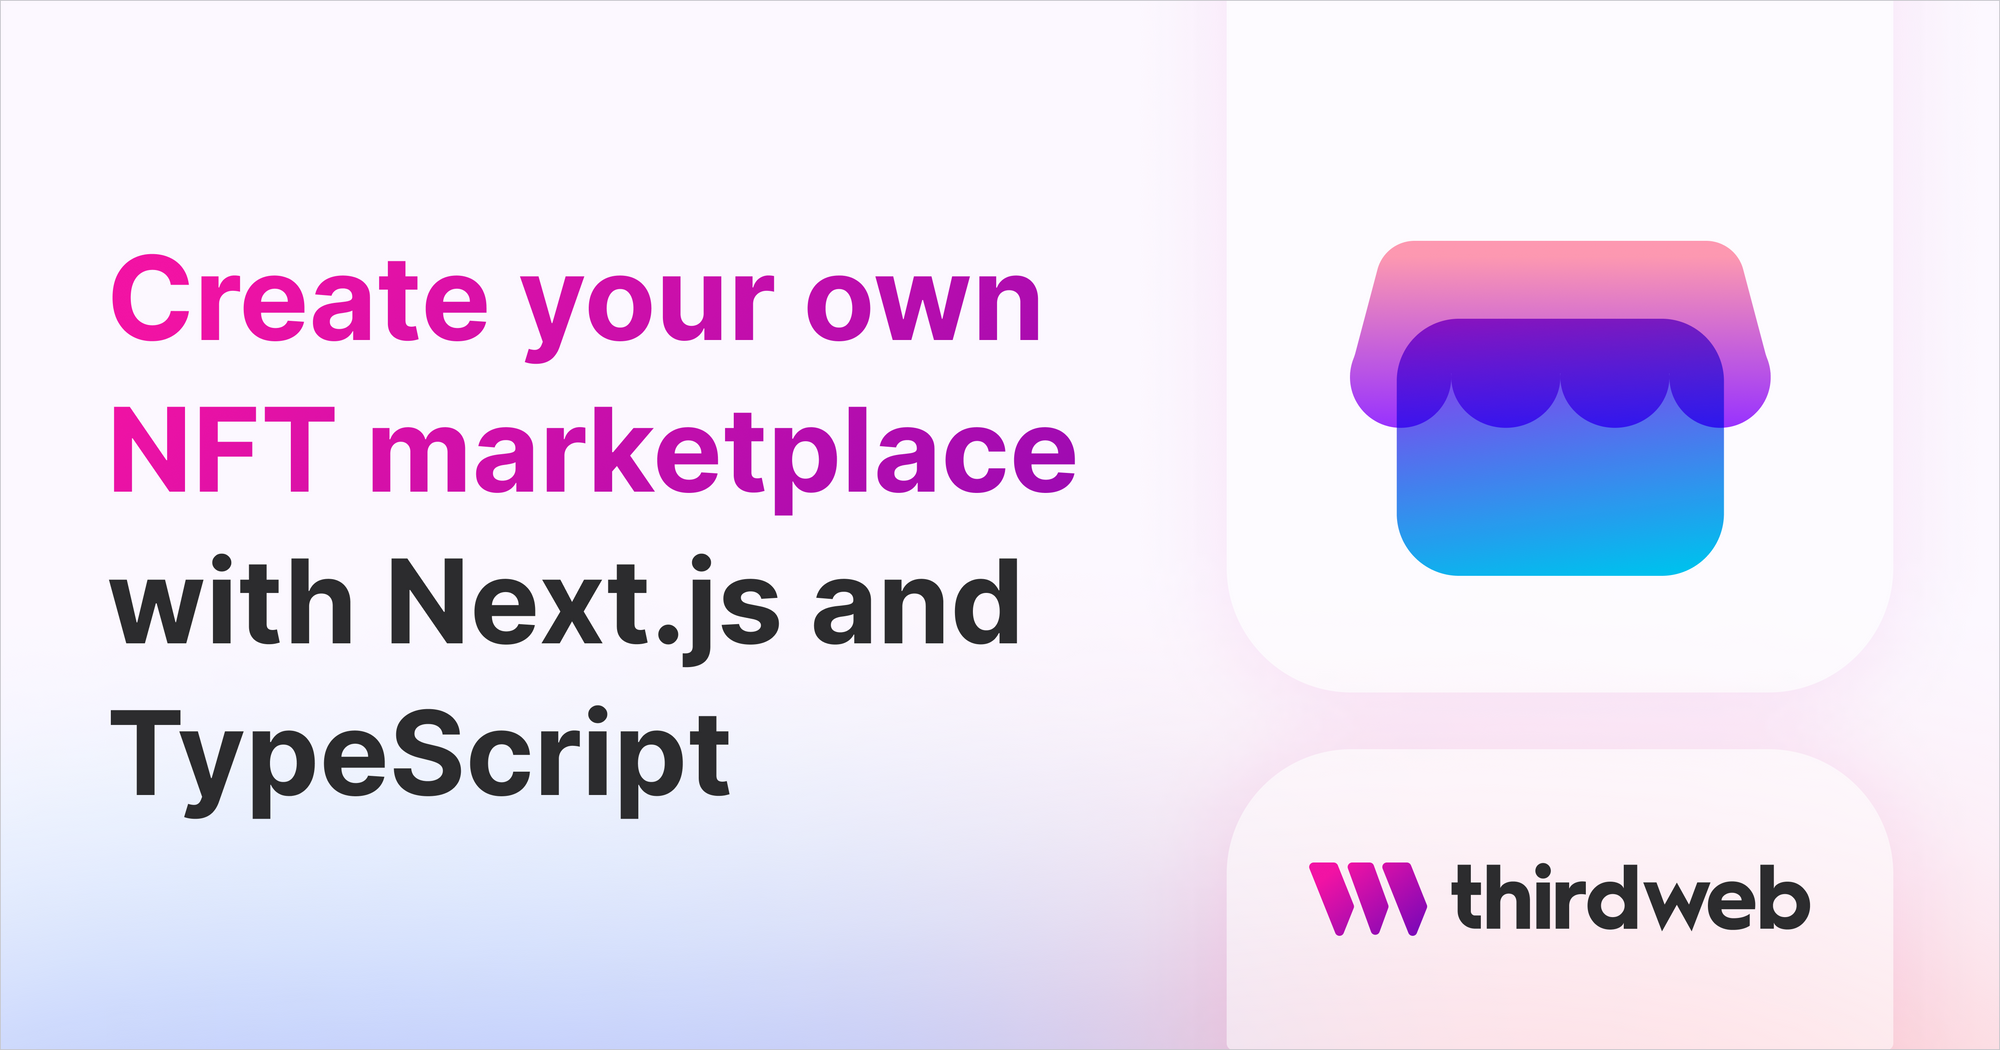 Create Your Own NFT Marketplace with TypeScript and Next.js